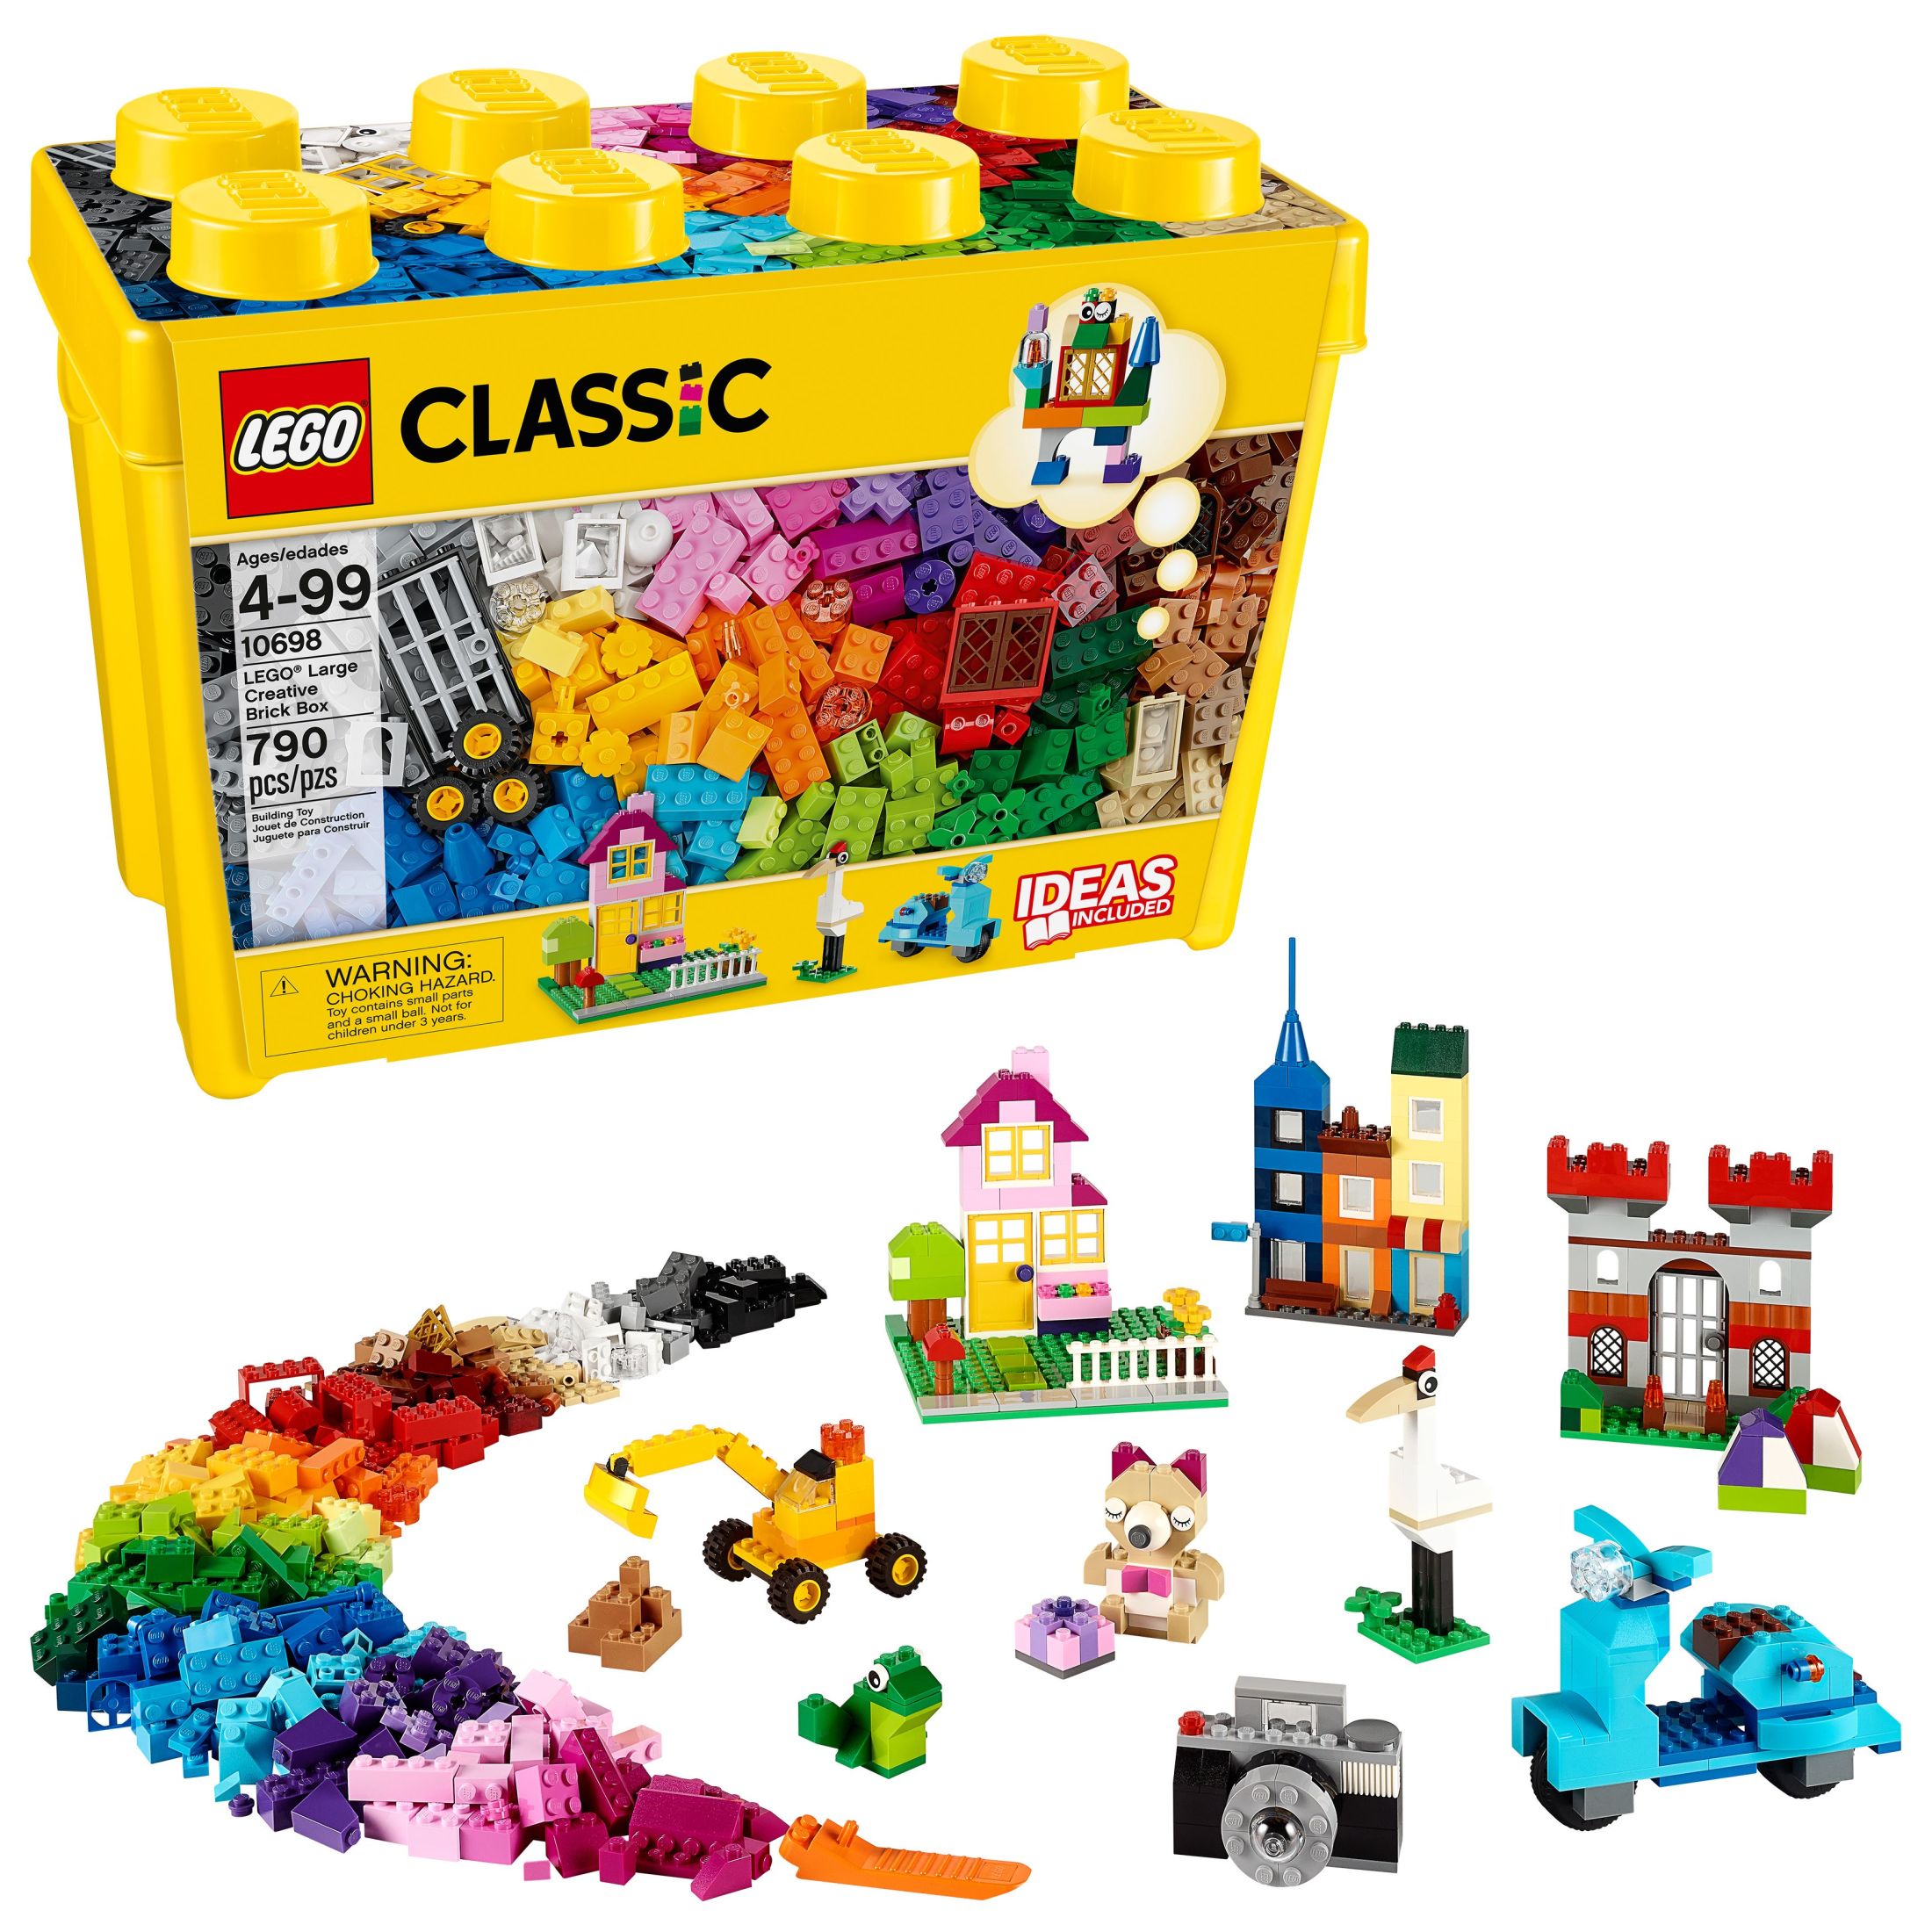 LEGO Classic Large Creative Brick Box 10698 Play and Be Inspired by LEGO Masters, Toy Storage Solution for Home or Classrooms, Interactive Building Toy for Kids, Boys, and Girls - image 1 of 6